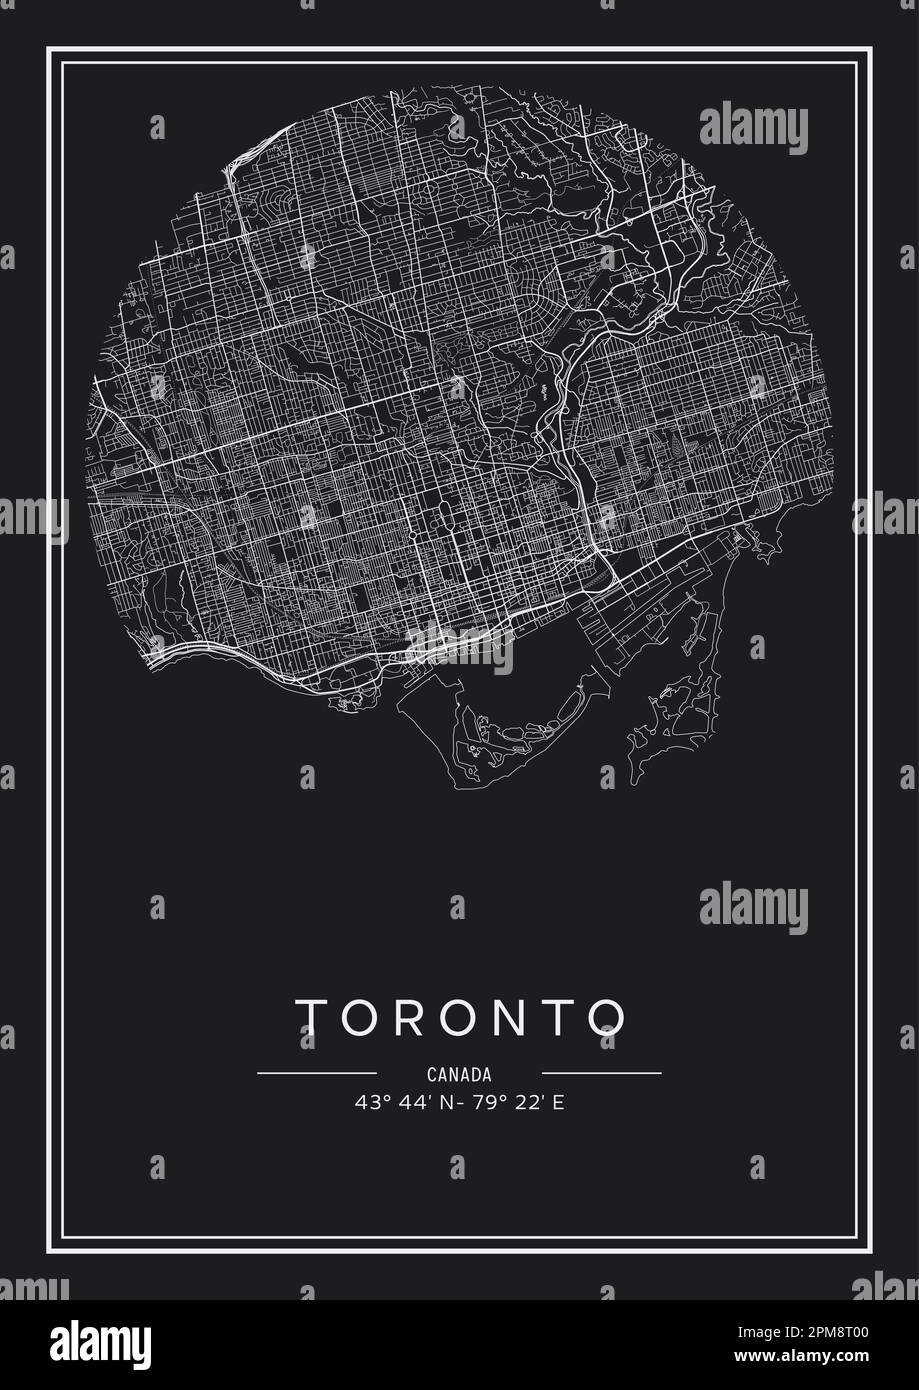 Black and white printable Toronto city map, poster design, vector illistration. Stock Vector